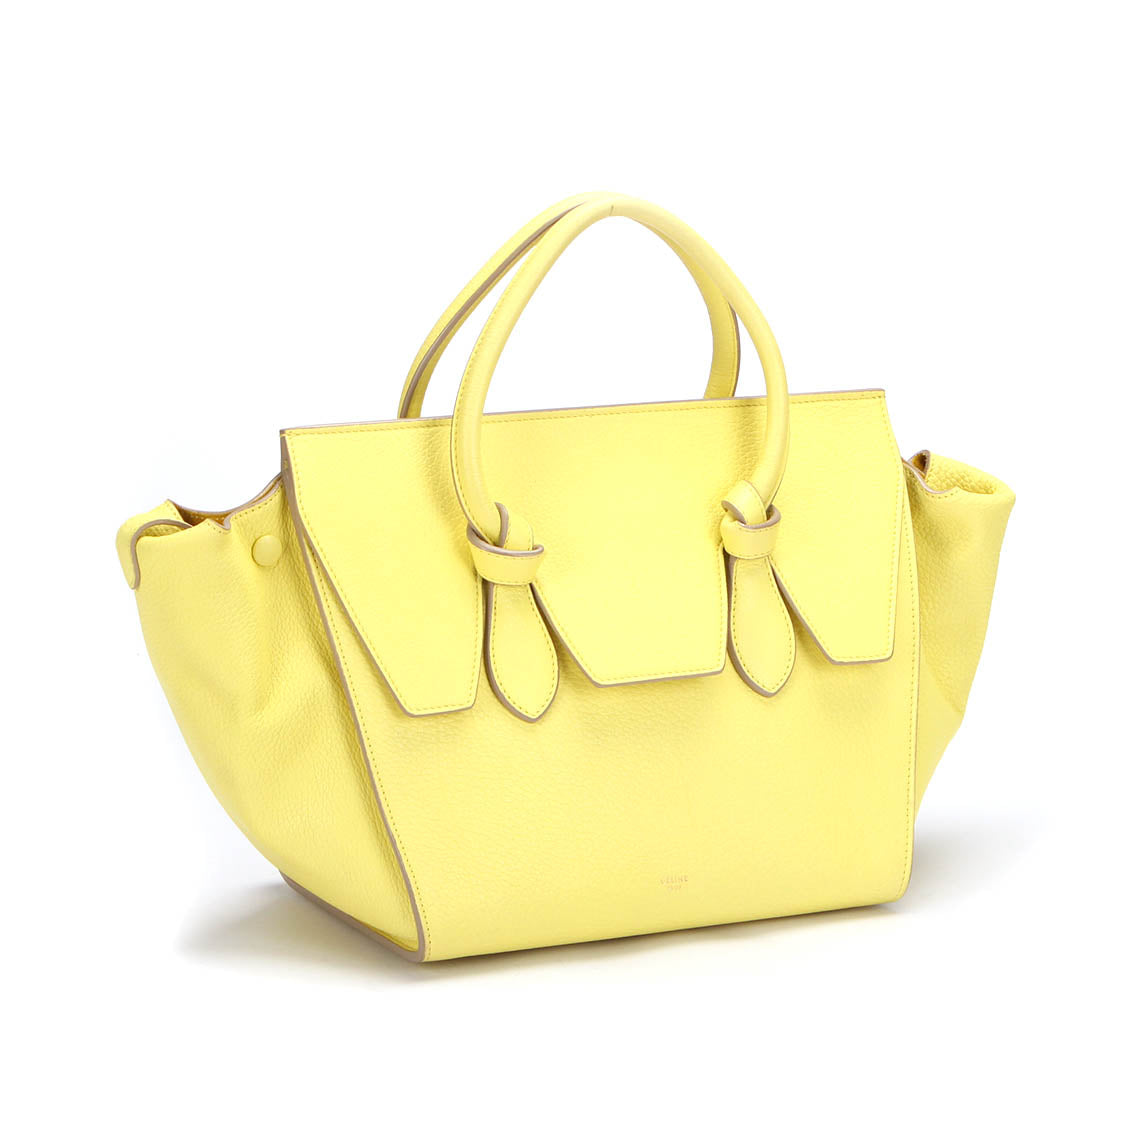 Tie Leather Tote Bag